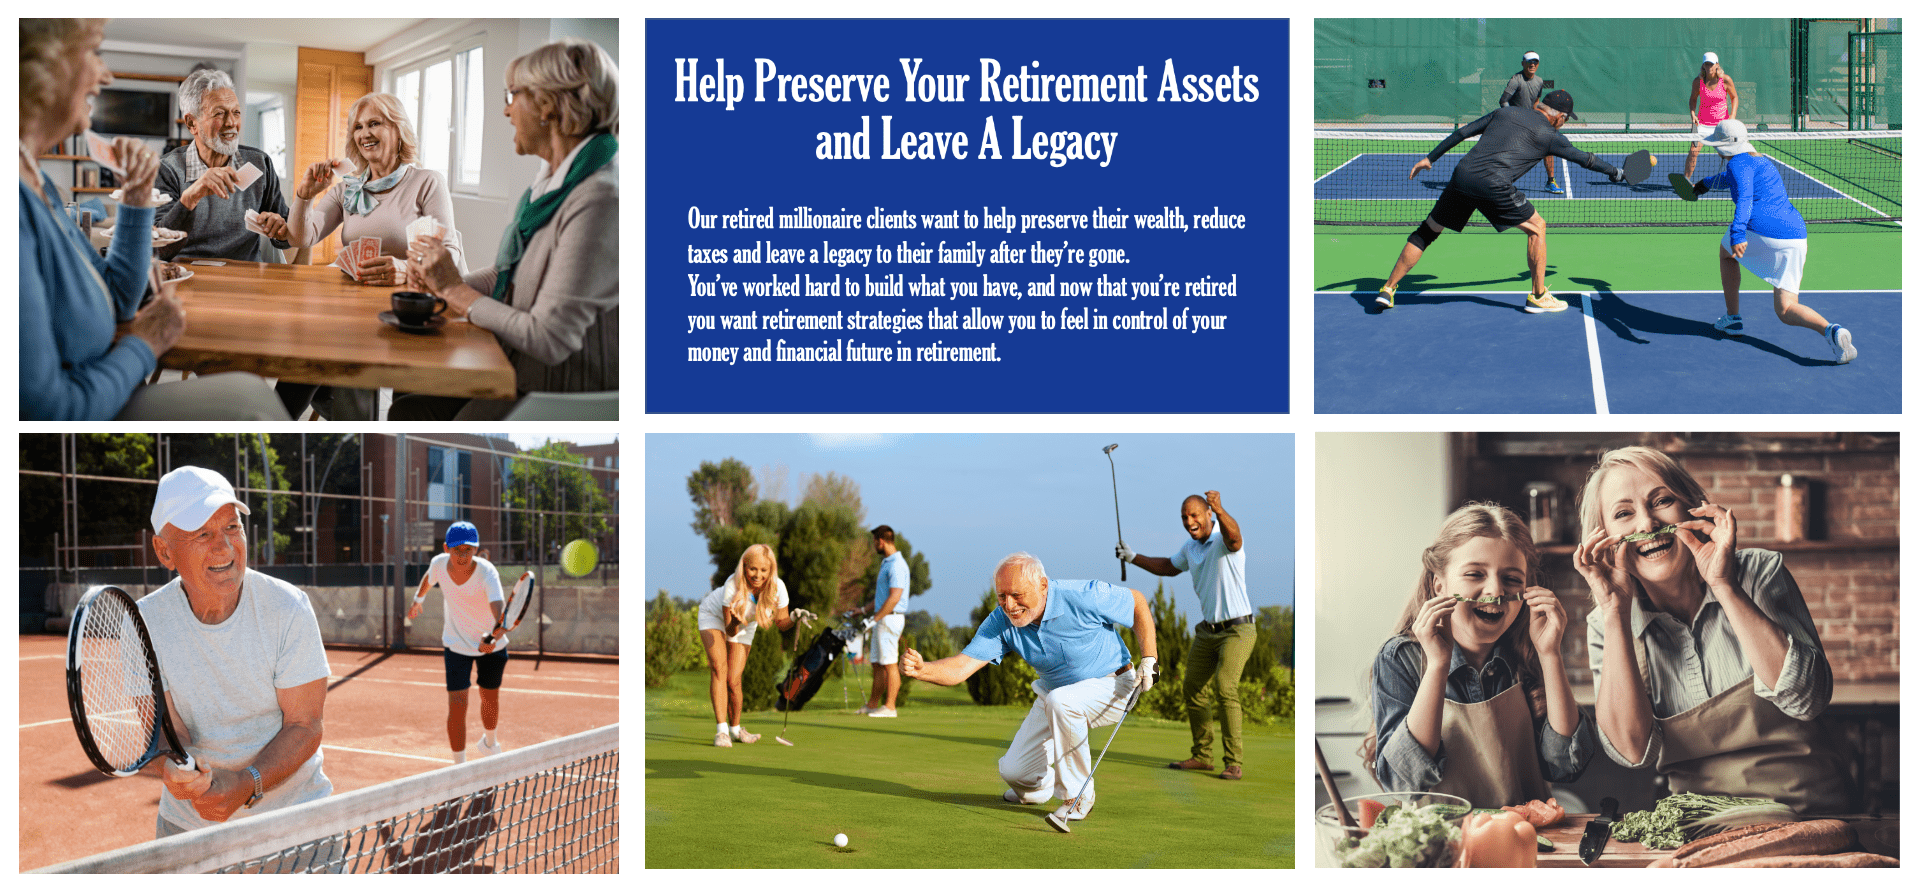 Our retired millionaire clients want to help preserve their wealth, reduce taxes and leave a legacy to their family after they’re gone. You’ve worked hard to build what you have, and now that you’re retired you want retirement strategies that allow you to feel in control of your money and financial future in retirement.